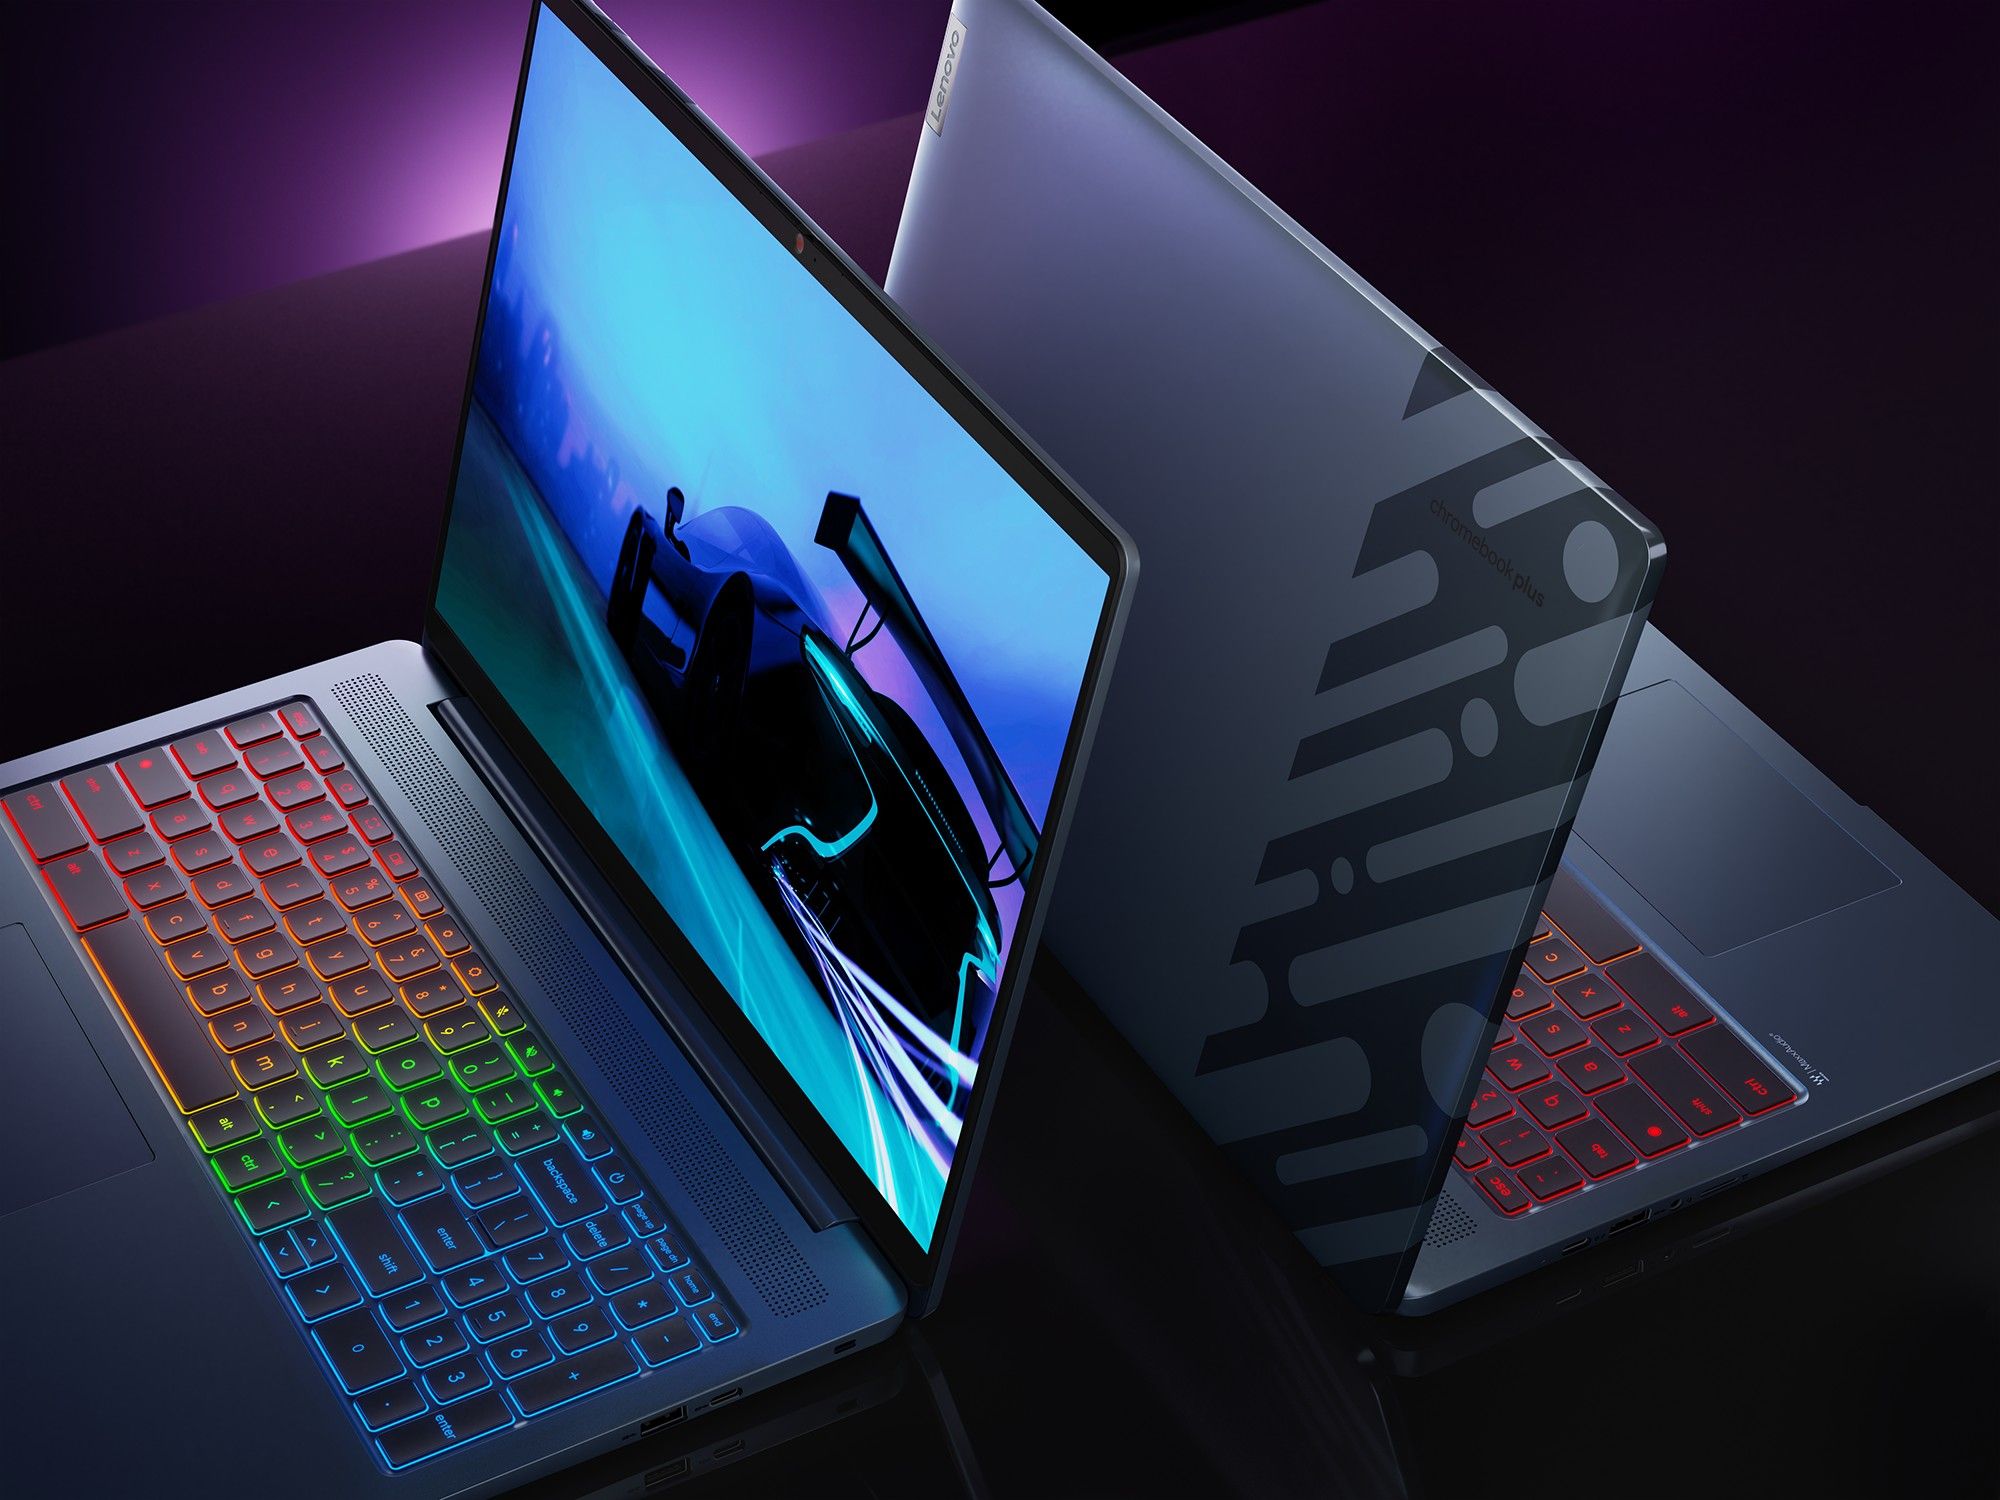 Two Lenovo gaming laptops, one with an RGB keyboard and the other with a red keyboard.